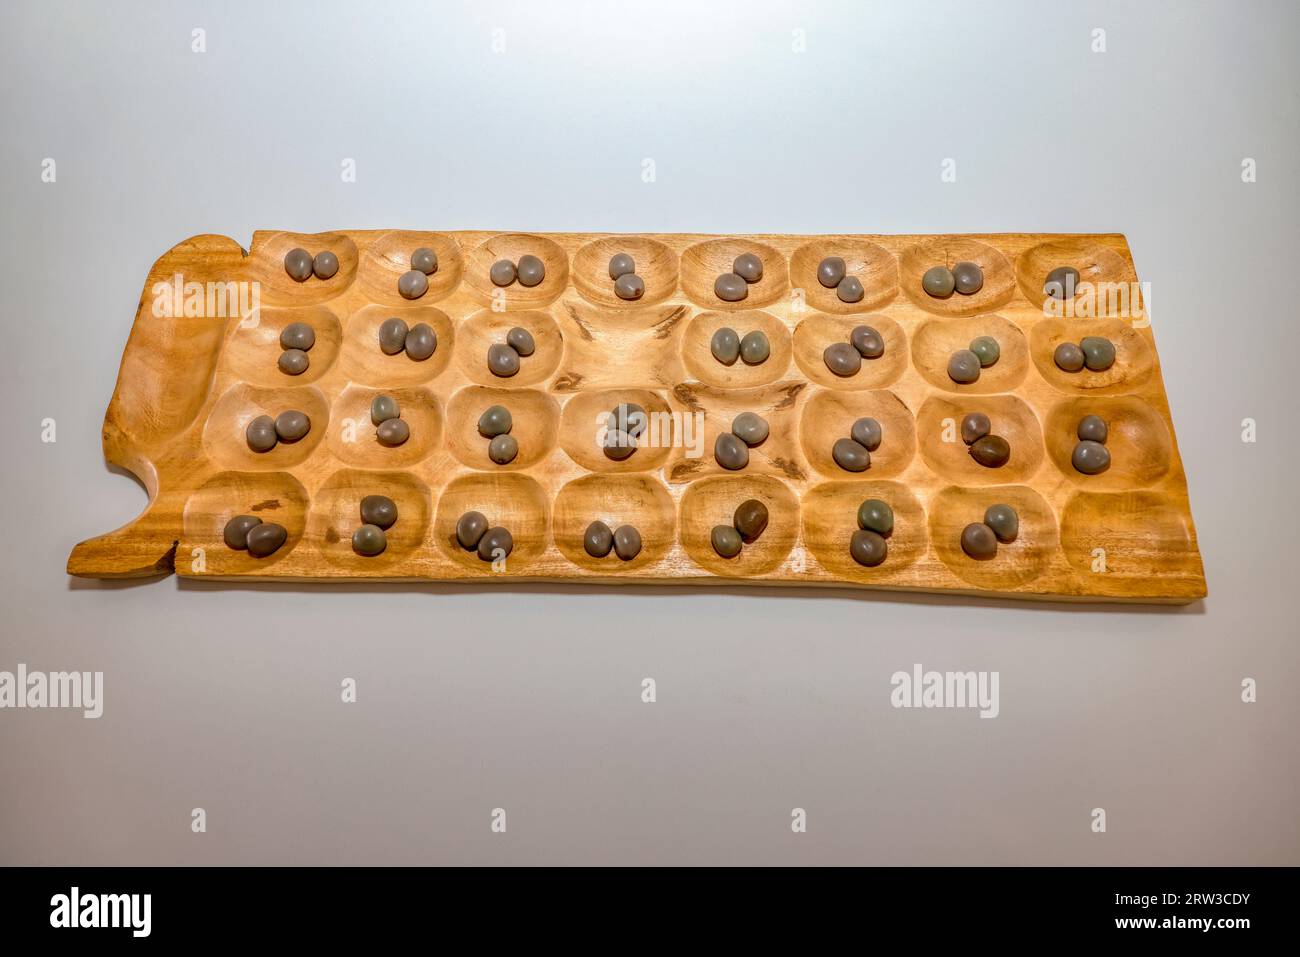 Mancala african board game made out of wood played with rock marbles, two-player turn-based strategy board games played with small stones, beans, or s Stock Photo